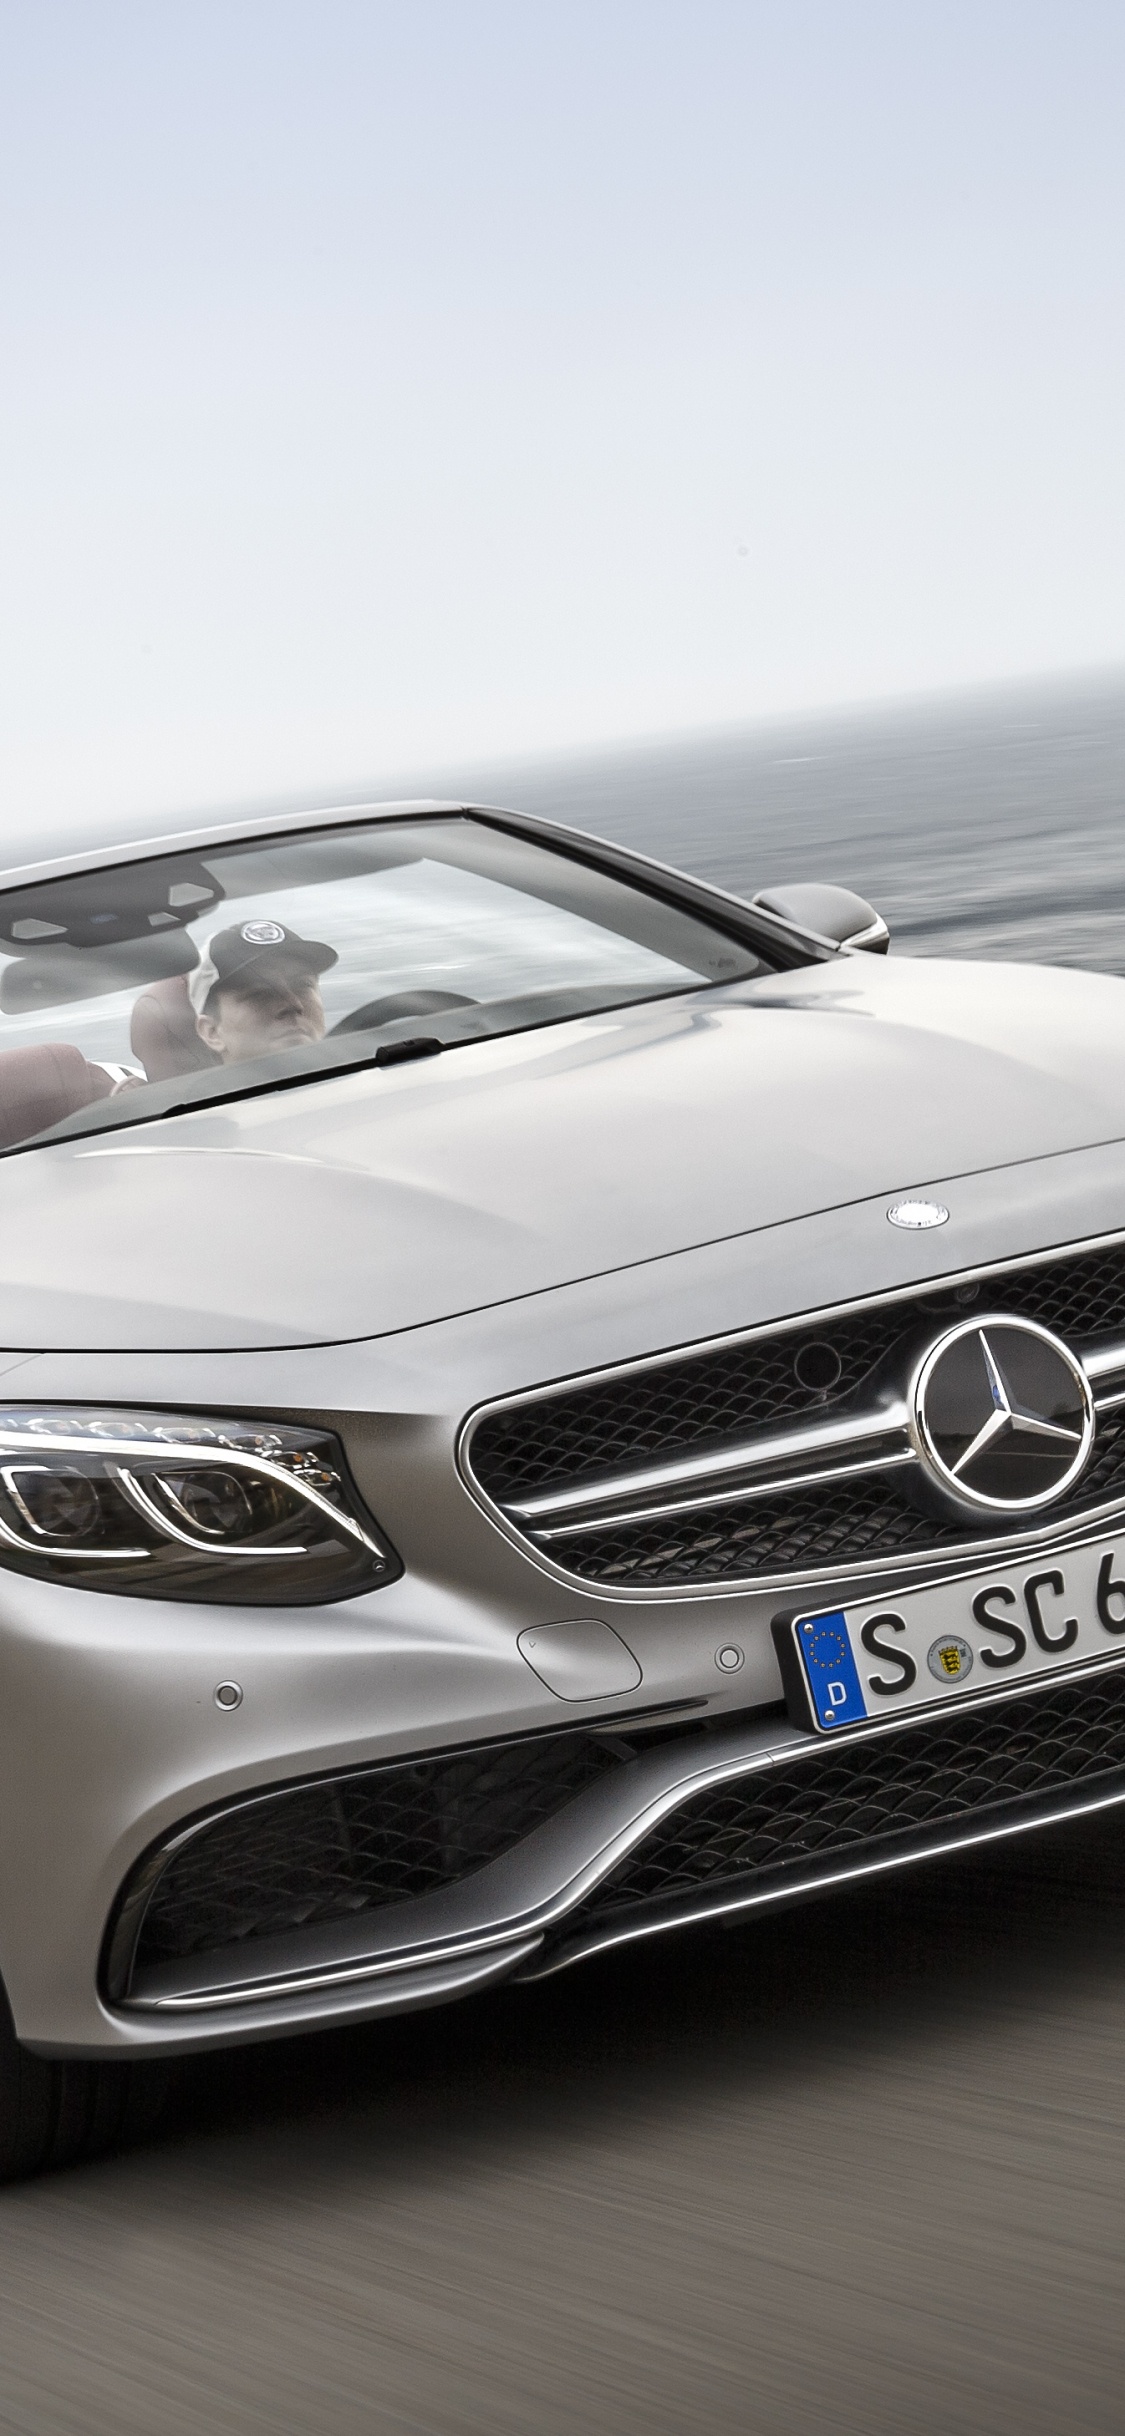 Gray Mercedes Benz Convertible Coupe on Road During Daytime. Wallpaper in 1125x2436 Resolution